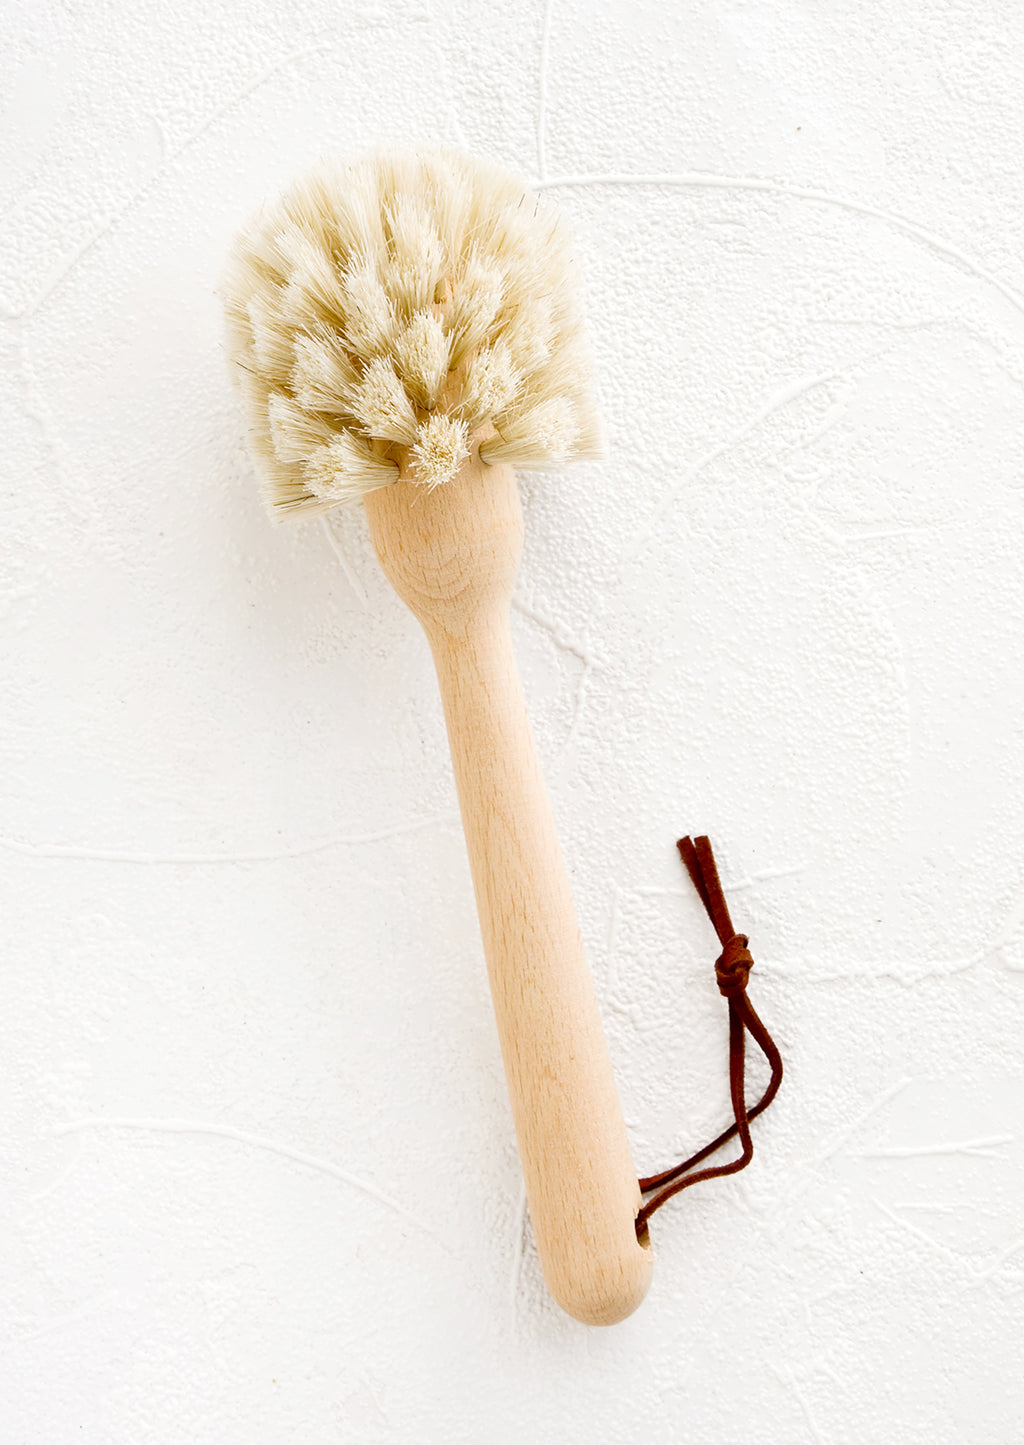 Long 360° [$18.00]: Dish brush with 360° head and beechwood handle with leather tie